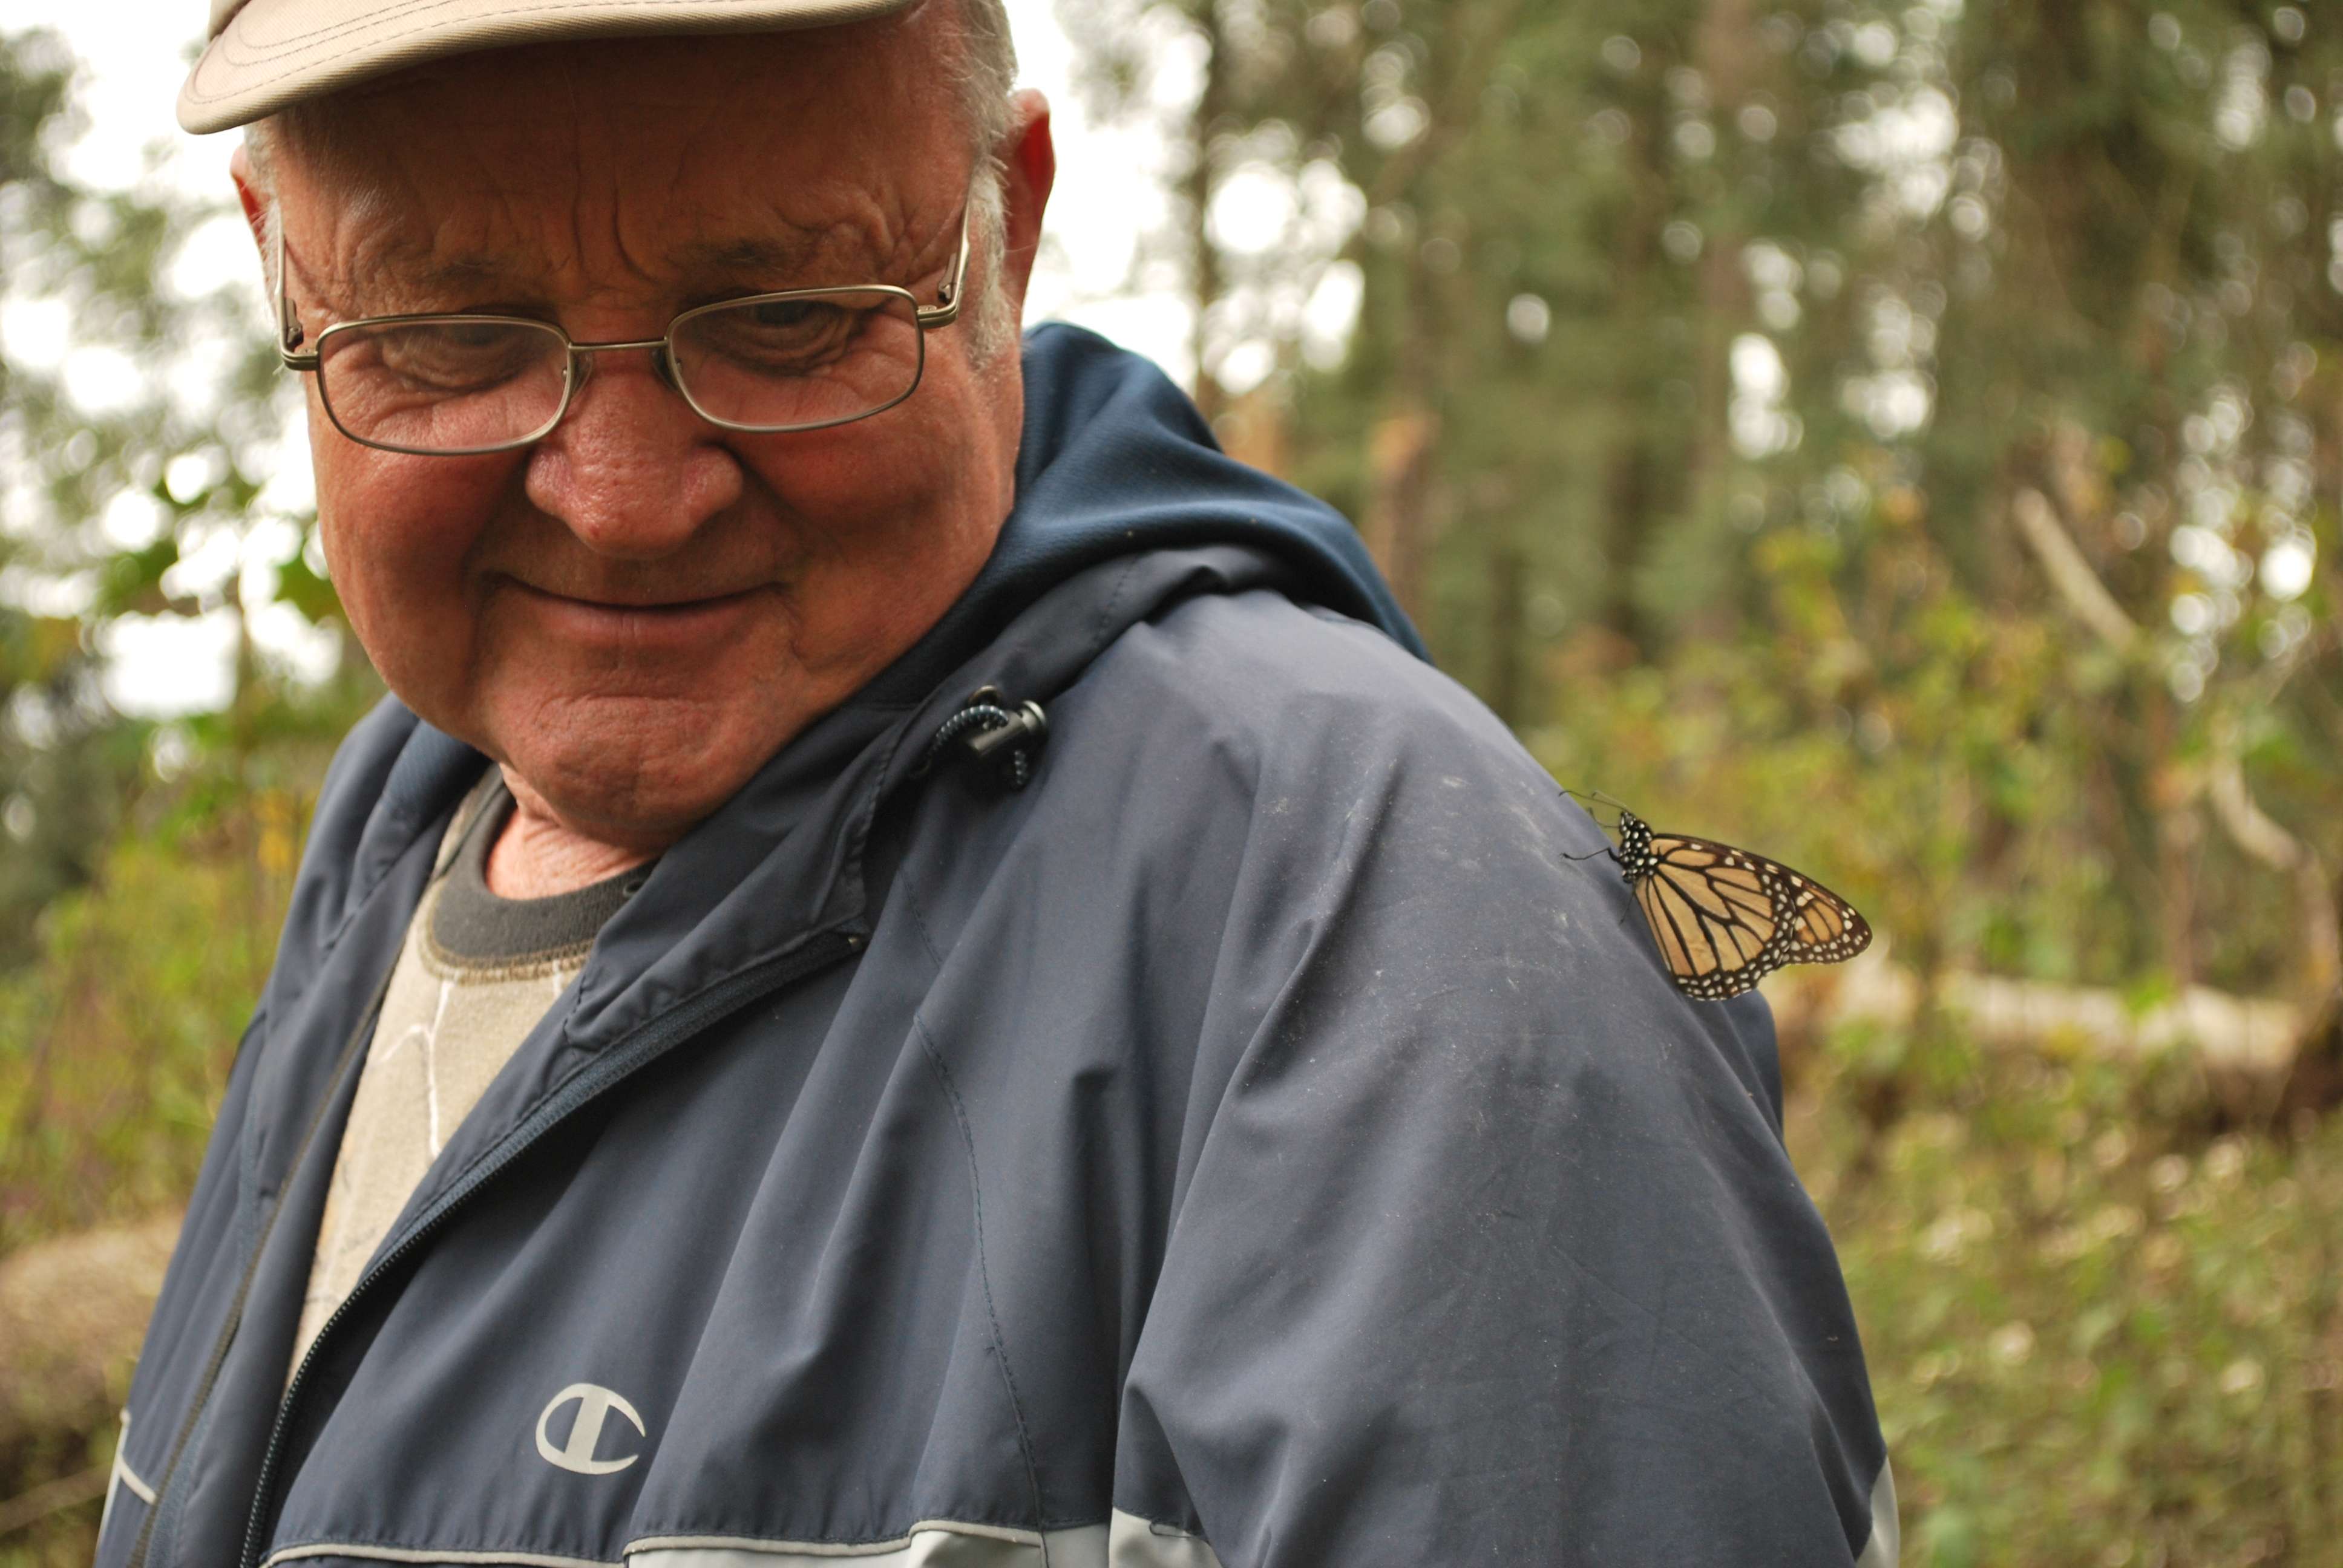 Nat Hab traveler experiences a memorable encounter with a monarch butterfly